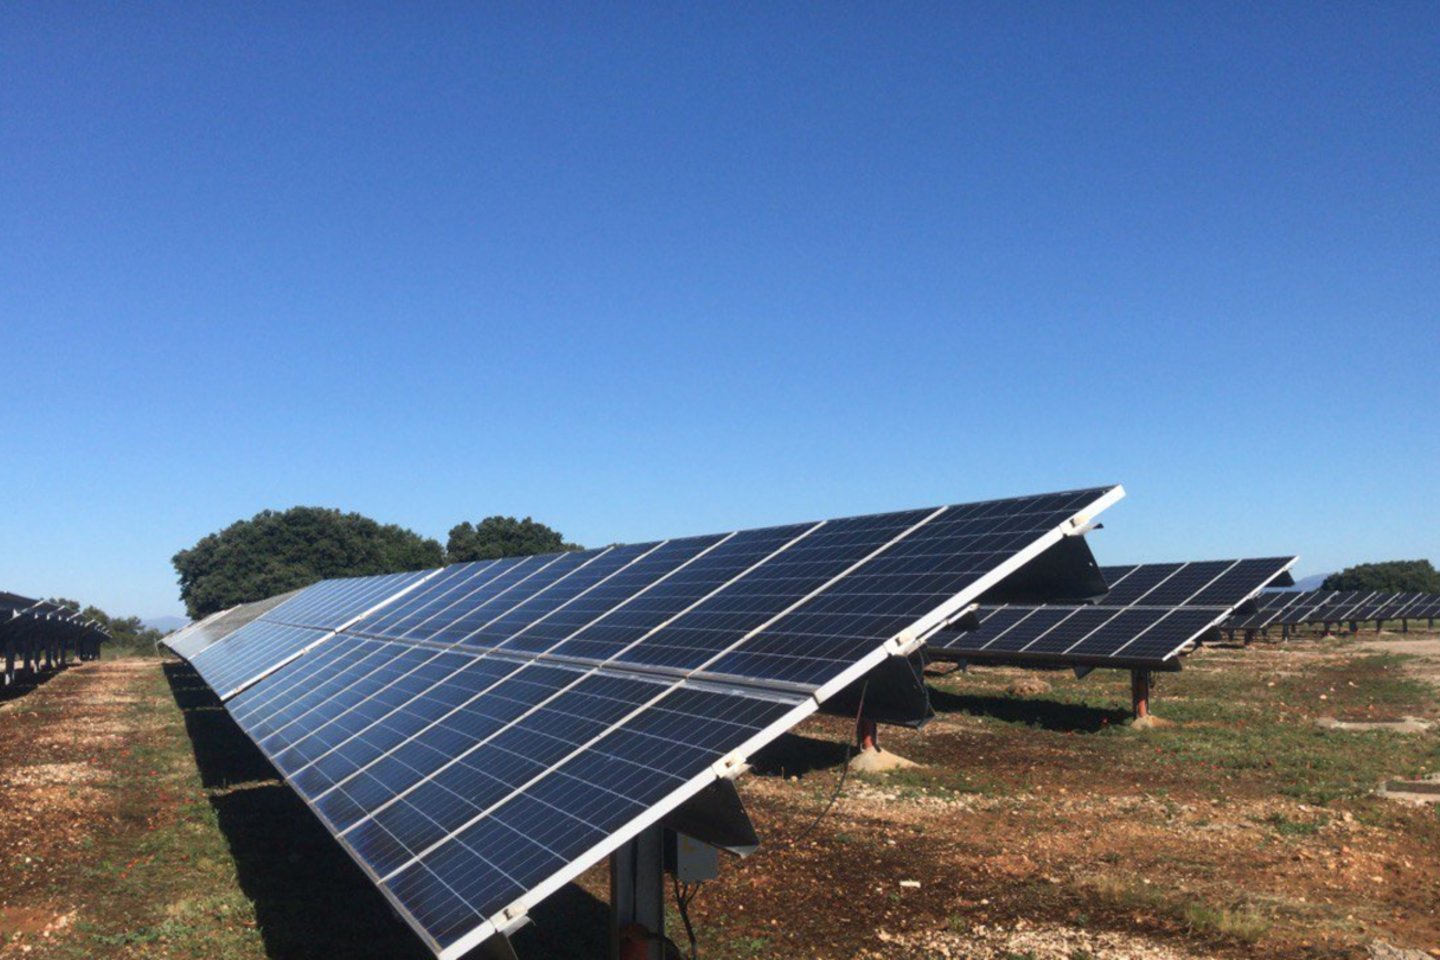 Inion Software, a provider of innovative solar power plant monitoring solutions, has partnered with Ecooo, a non-profit organization that helps people become successful producers of clean energy.